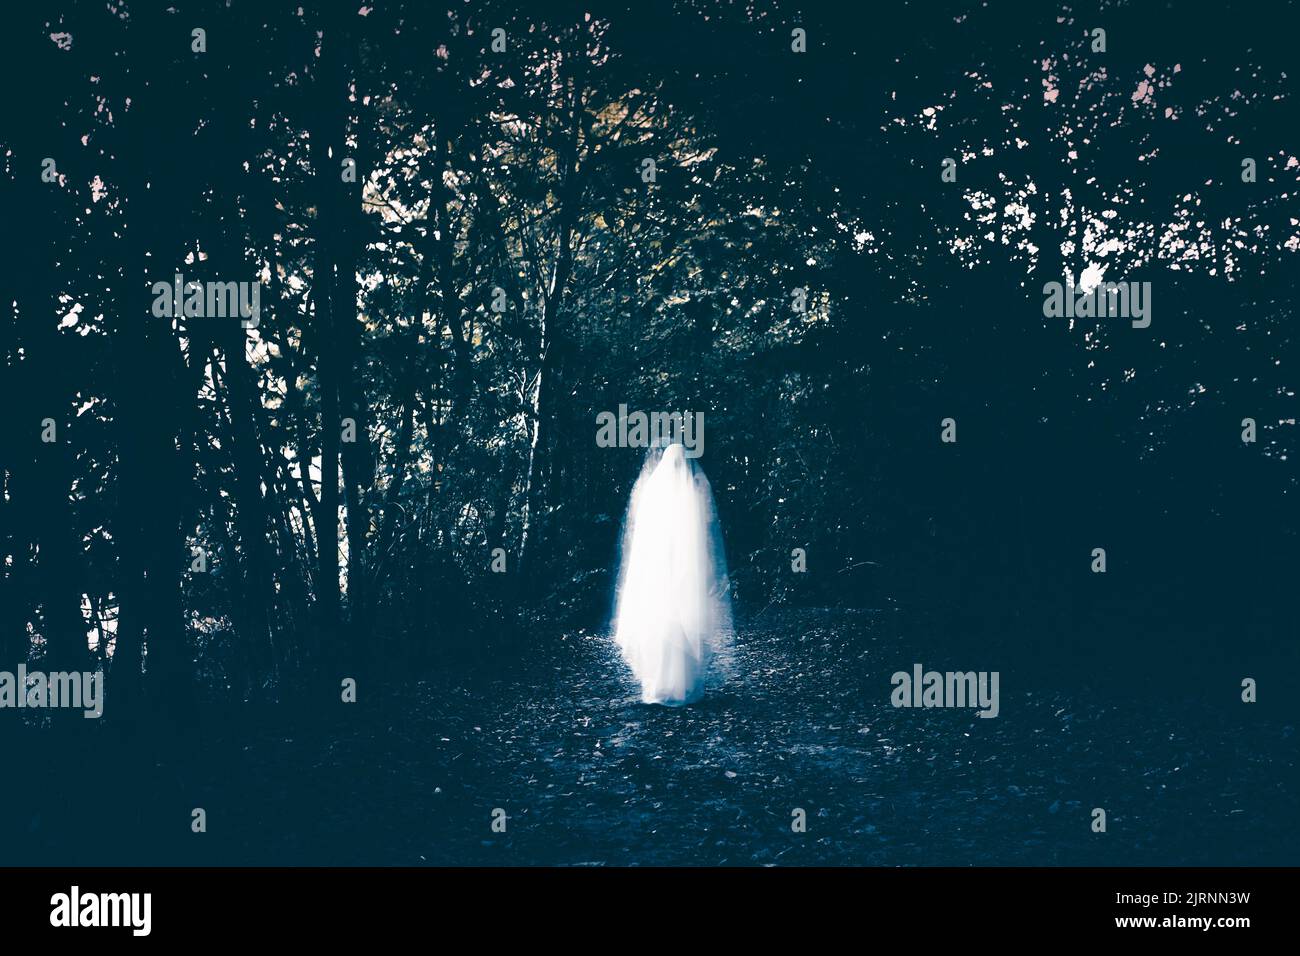 Horror background of a ghostly figure in enchanted a forest. Halloween concept Stock Photo